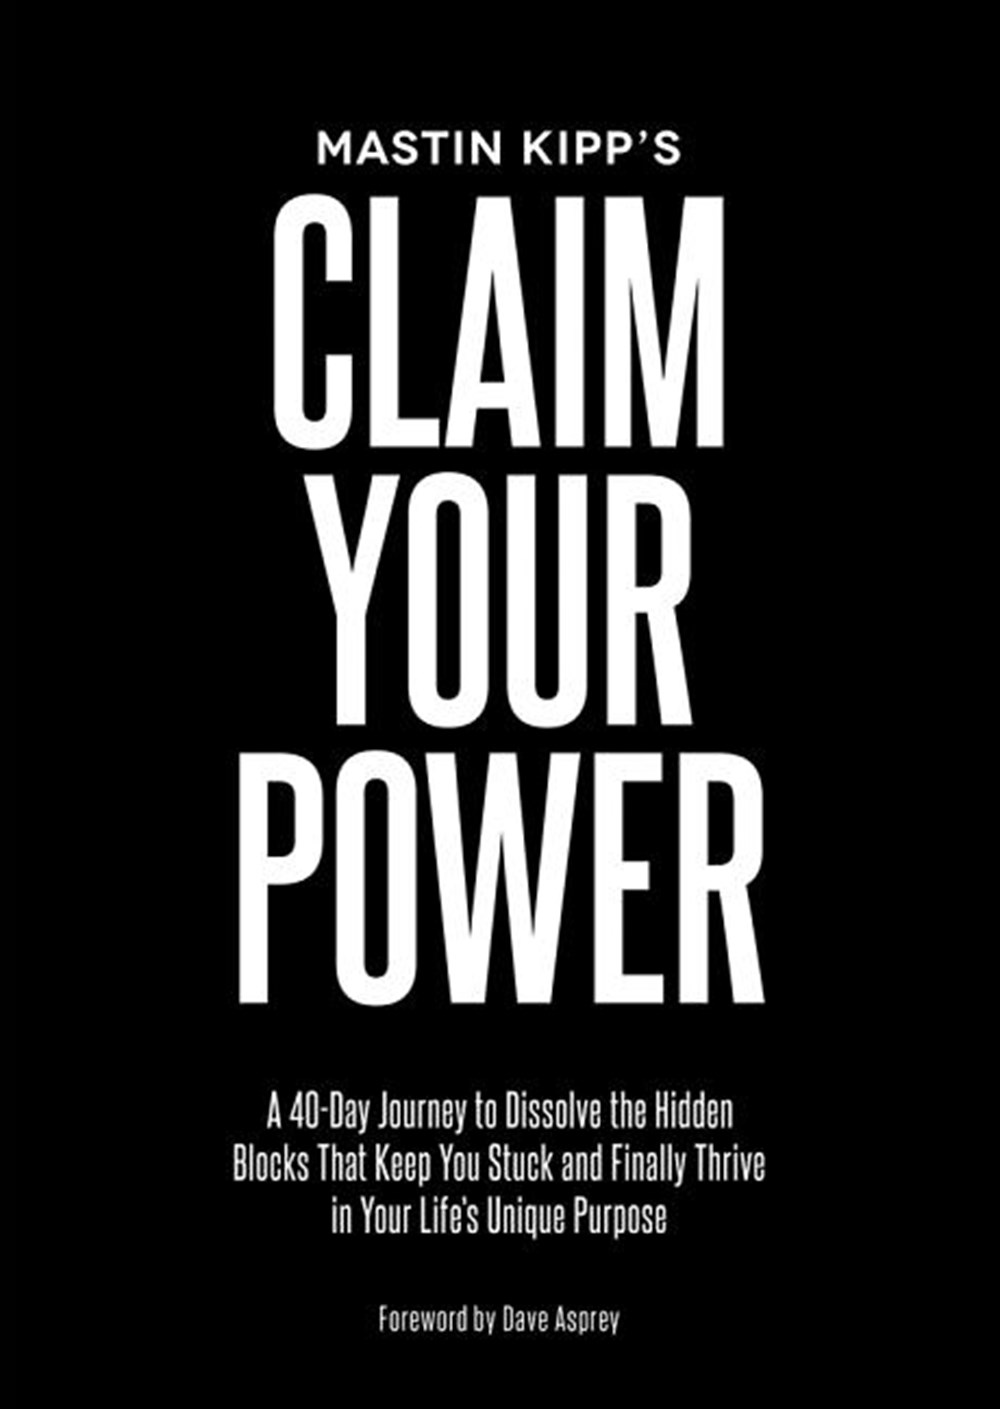 Claim Your Power: A 40-Day Journey to Dissolve the Hidden Blocks That Keep You Stuck and Finally Thr